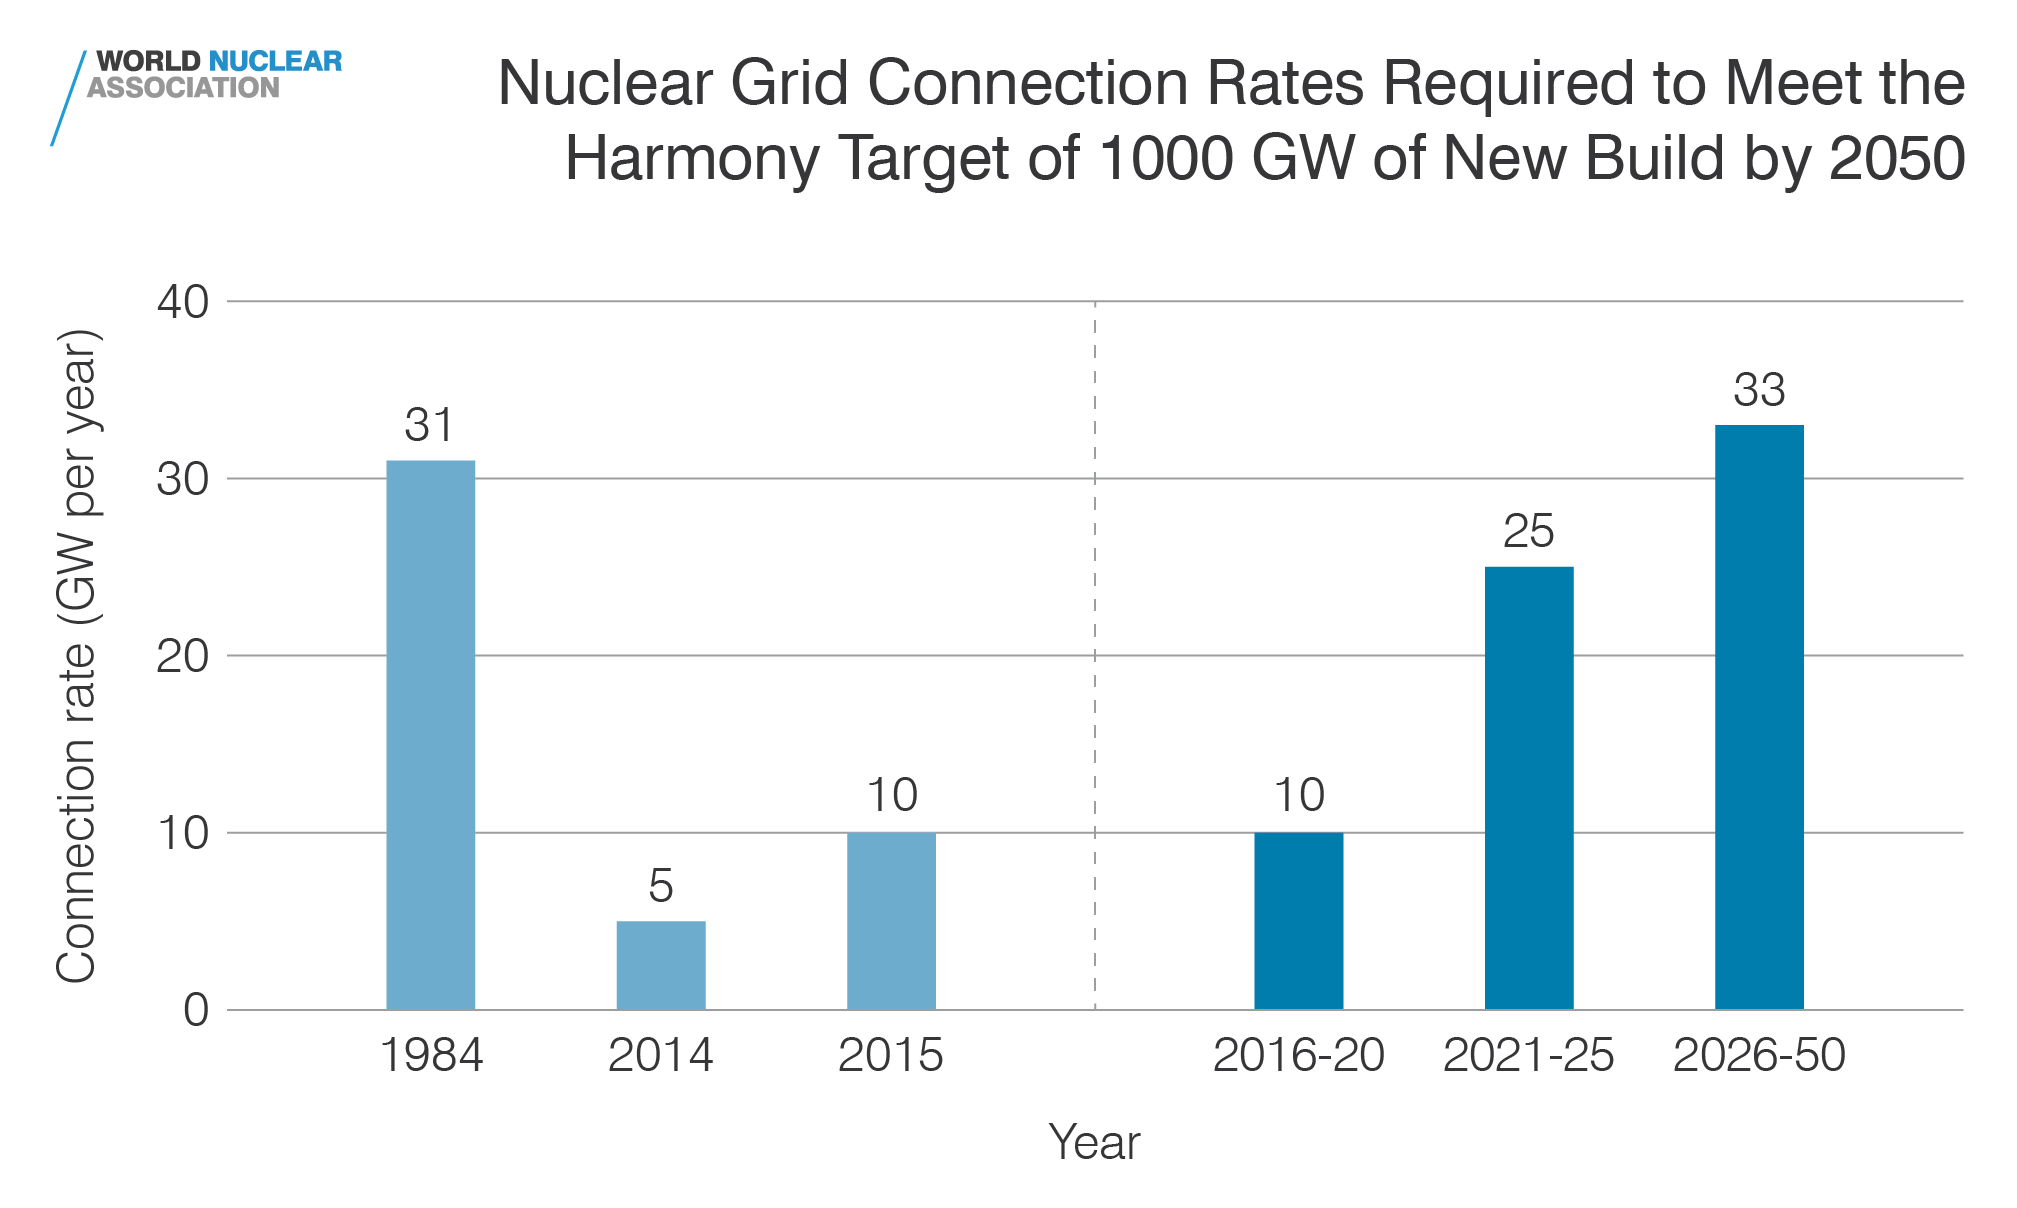 Nuclear grid connection rates required to meet the Harmony target of 1000 GW of new build by 2050